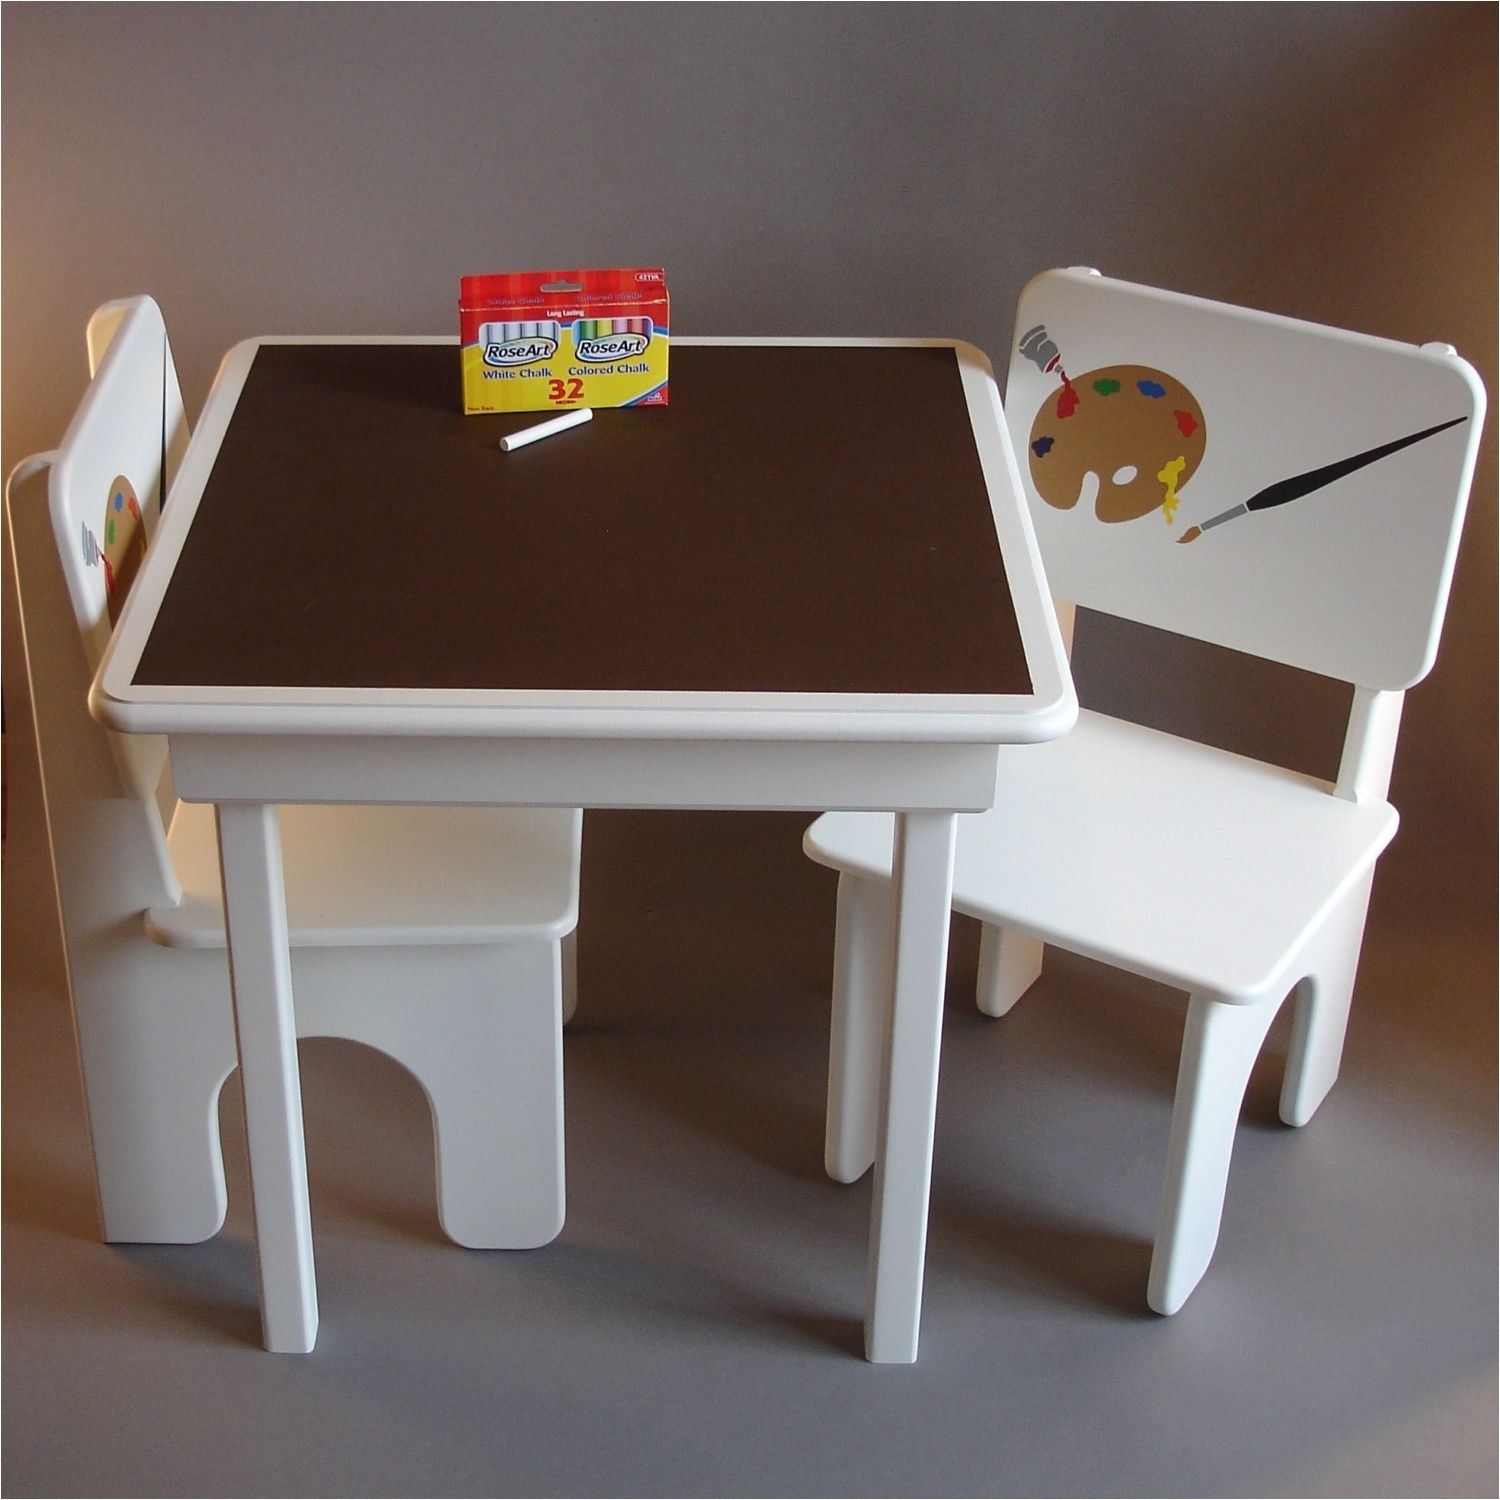 Small Table and Chairs for toddlers Chalkboard Table and Chair Set for Kids Painted Furniture